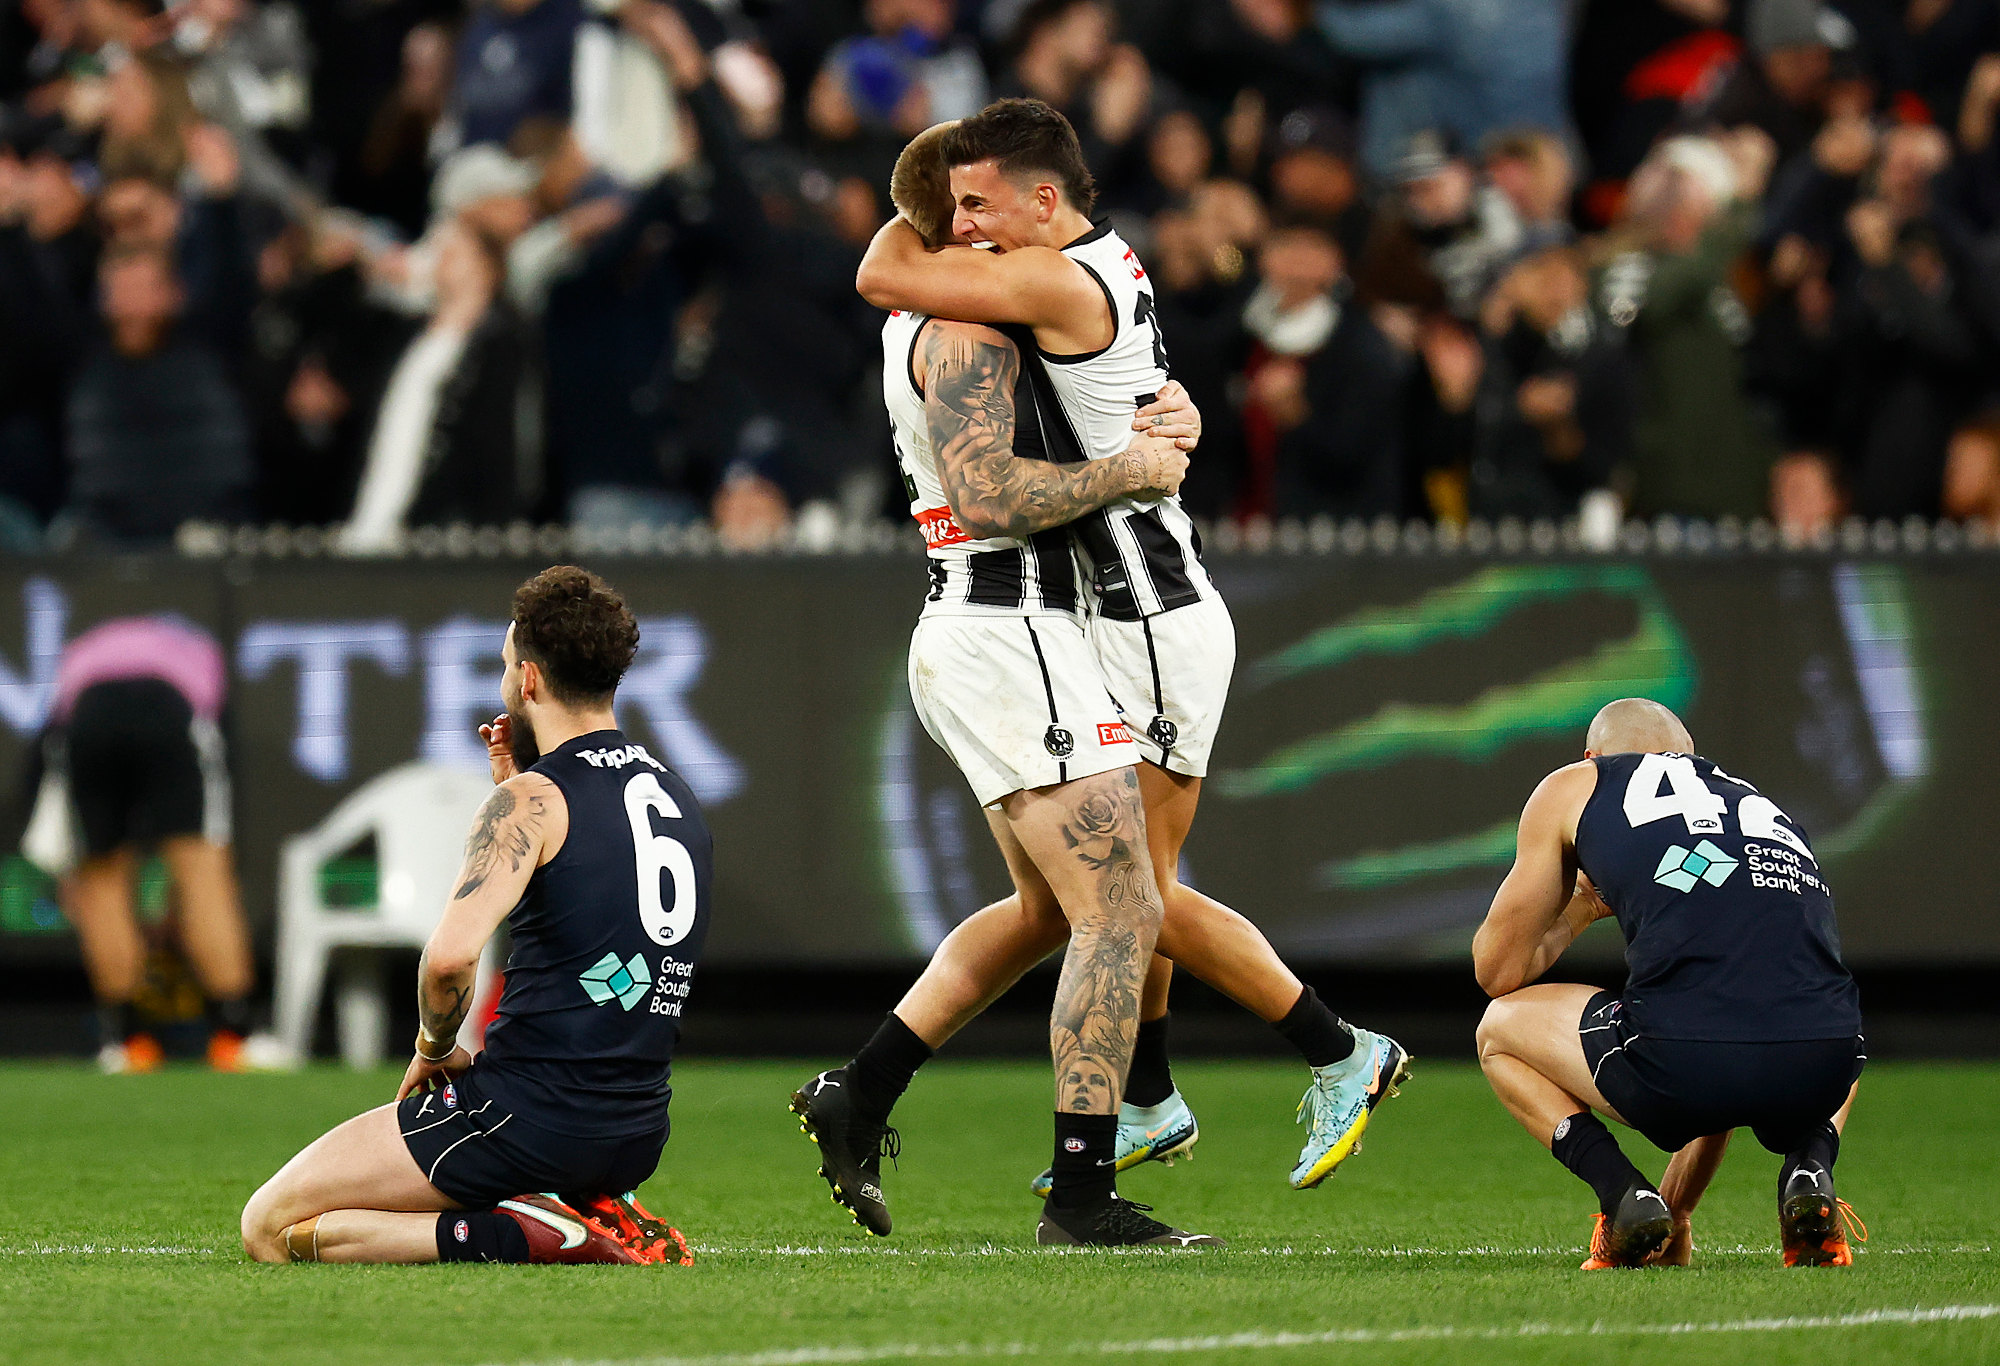 Zac Williams and Adam Saad of the Blues look dejected as Jordan De Goey and Nick Daicos of the Magpies celebrate.